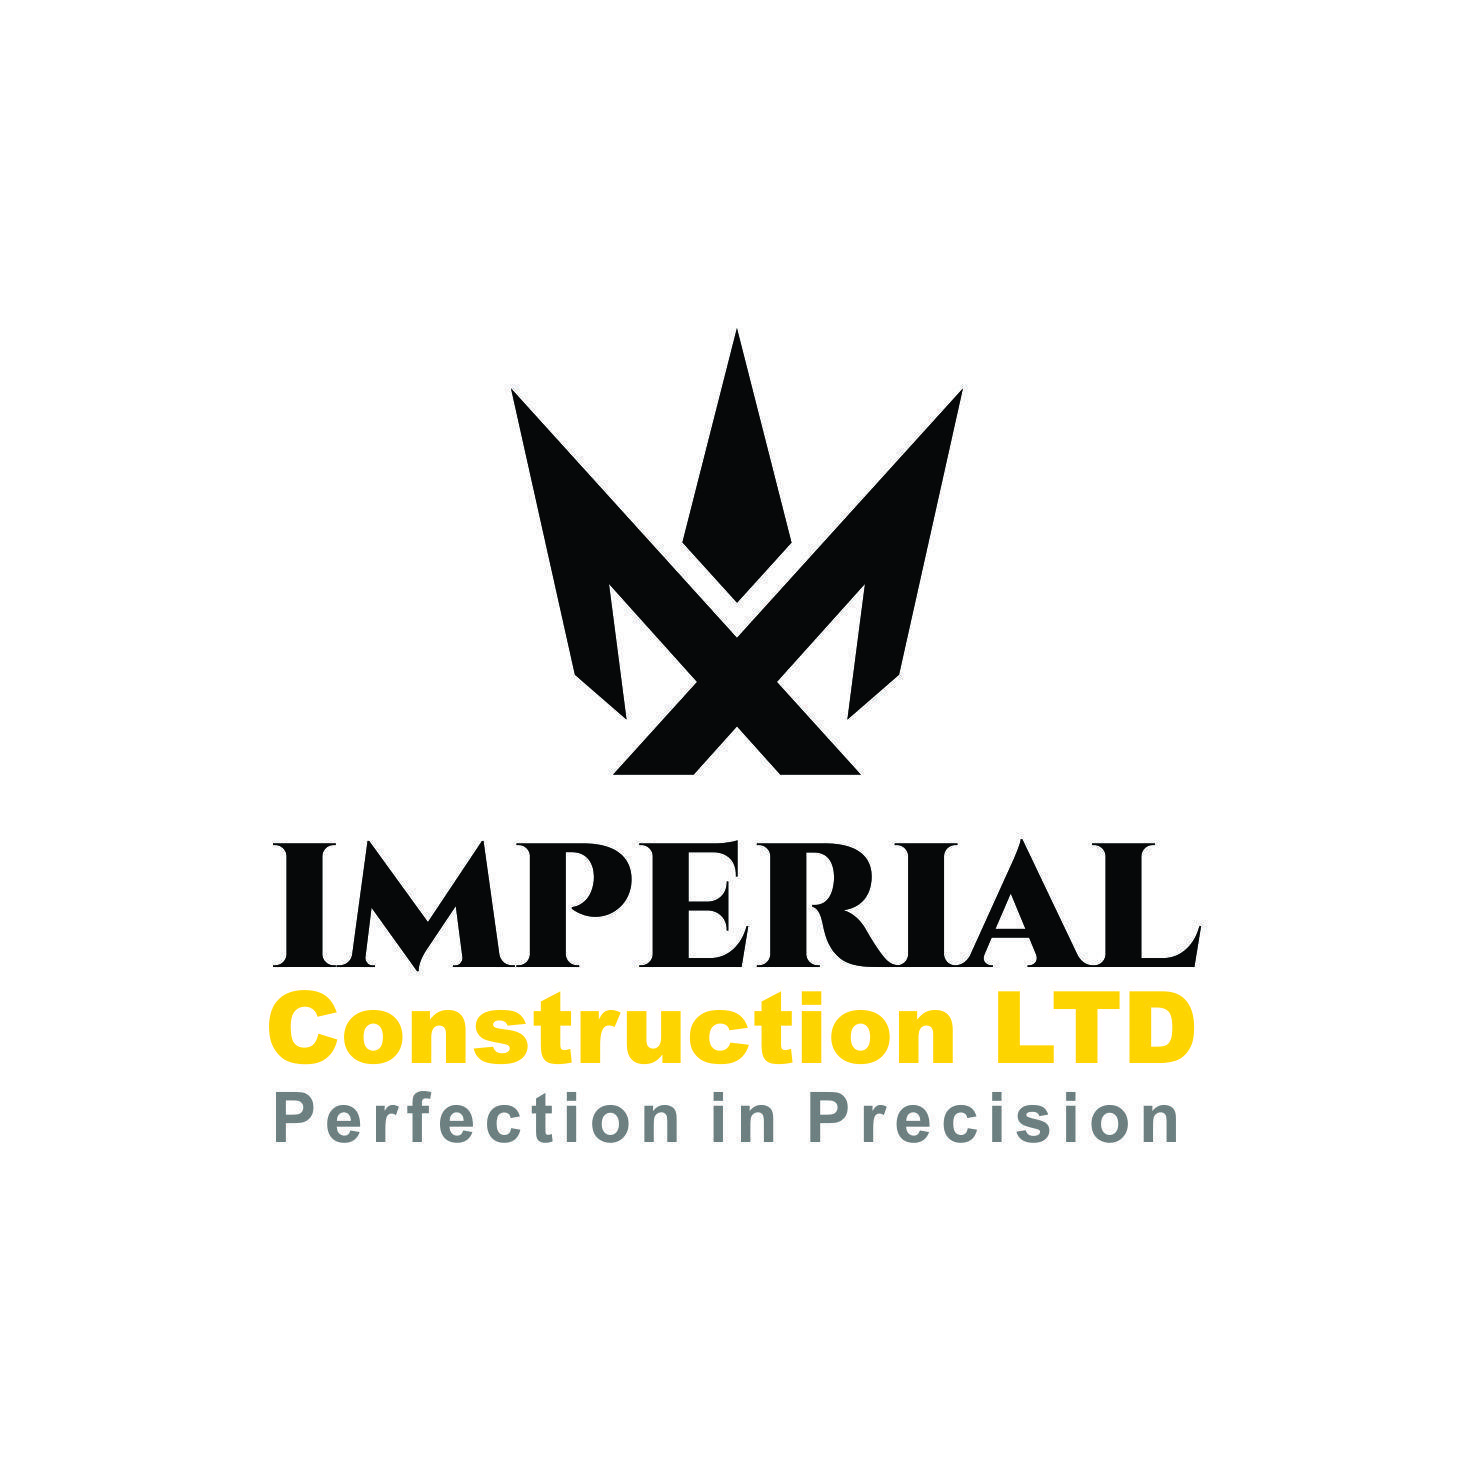 Imperial Logo - Modern, Professional, Construction Logo Design for Imperial ...